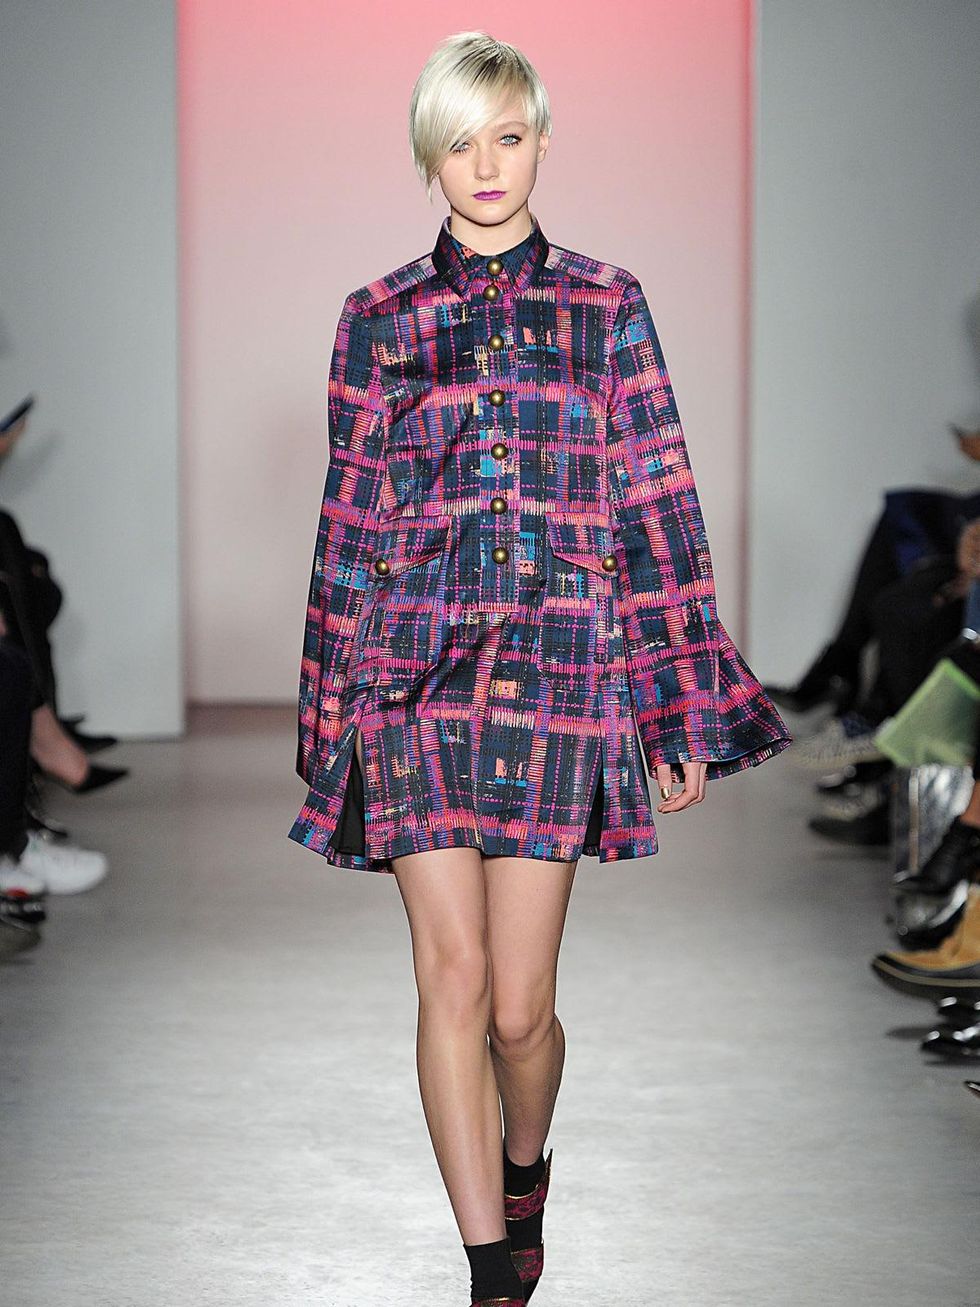 Clifford New York Fashion Week fall 2015 Nanette Lepore March 2015 Look 14